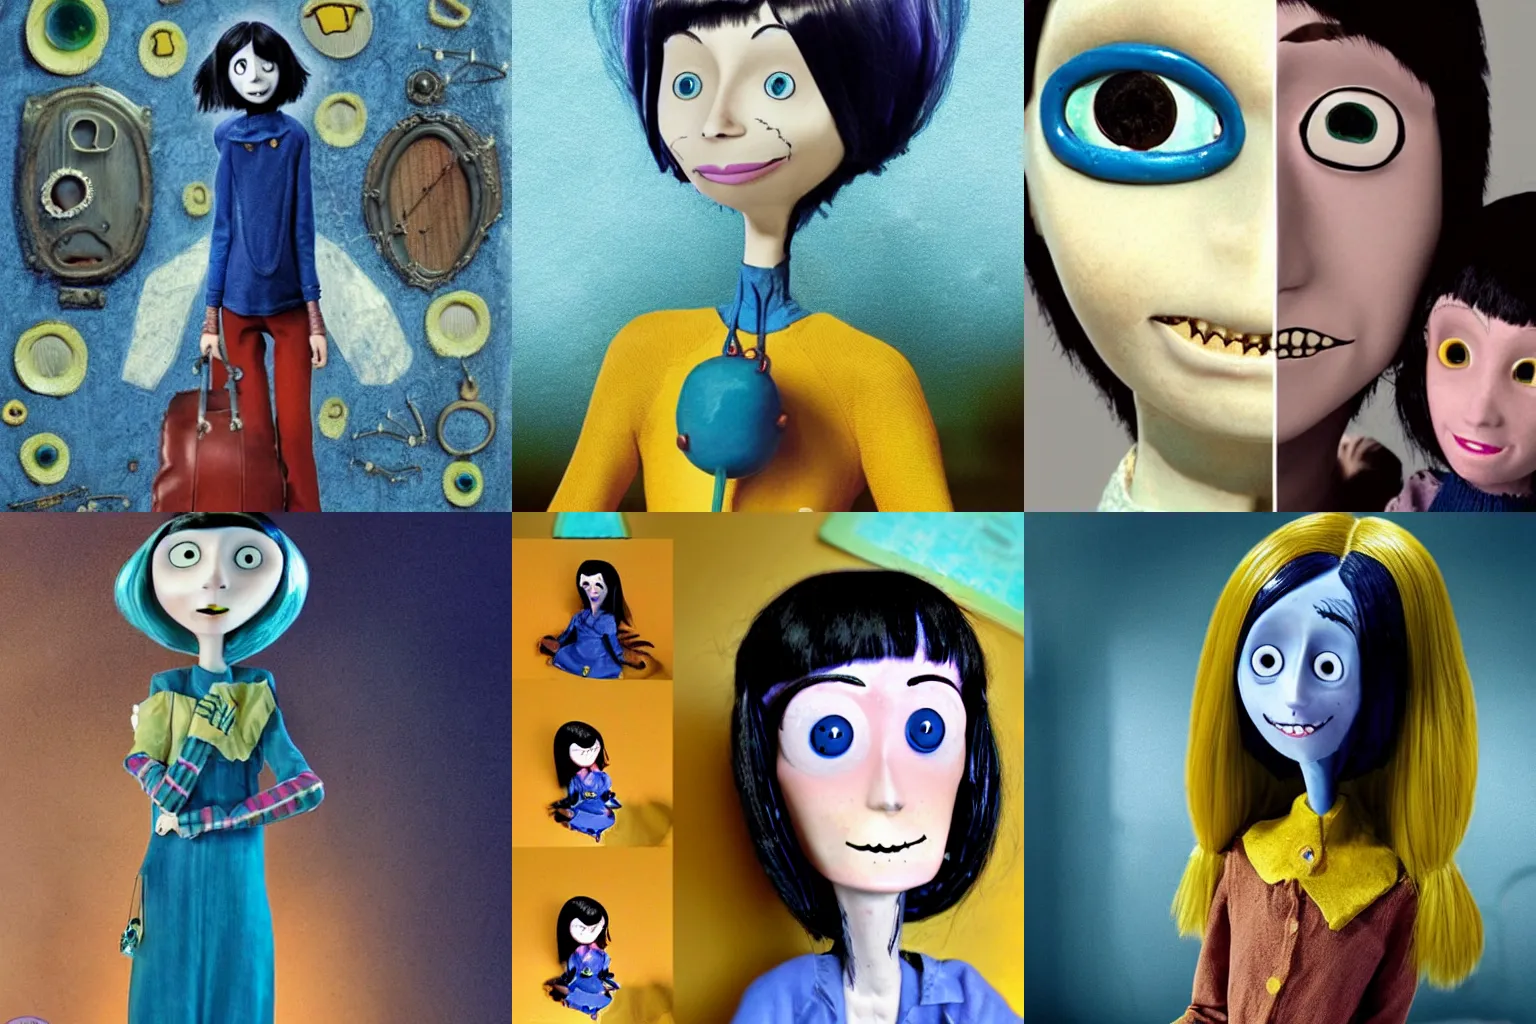 Prompt: Coraline from the movie Coraline (2009) if she were a real girl